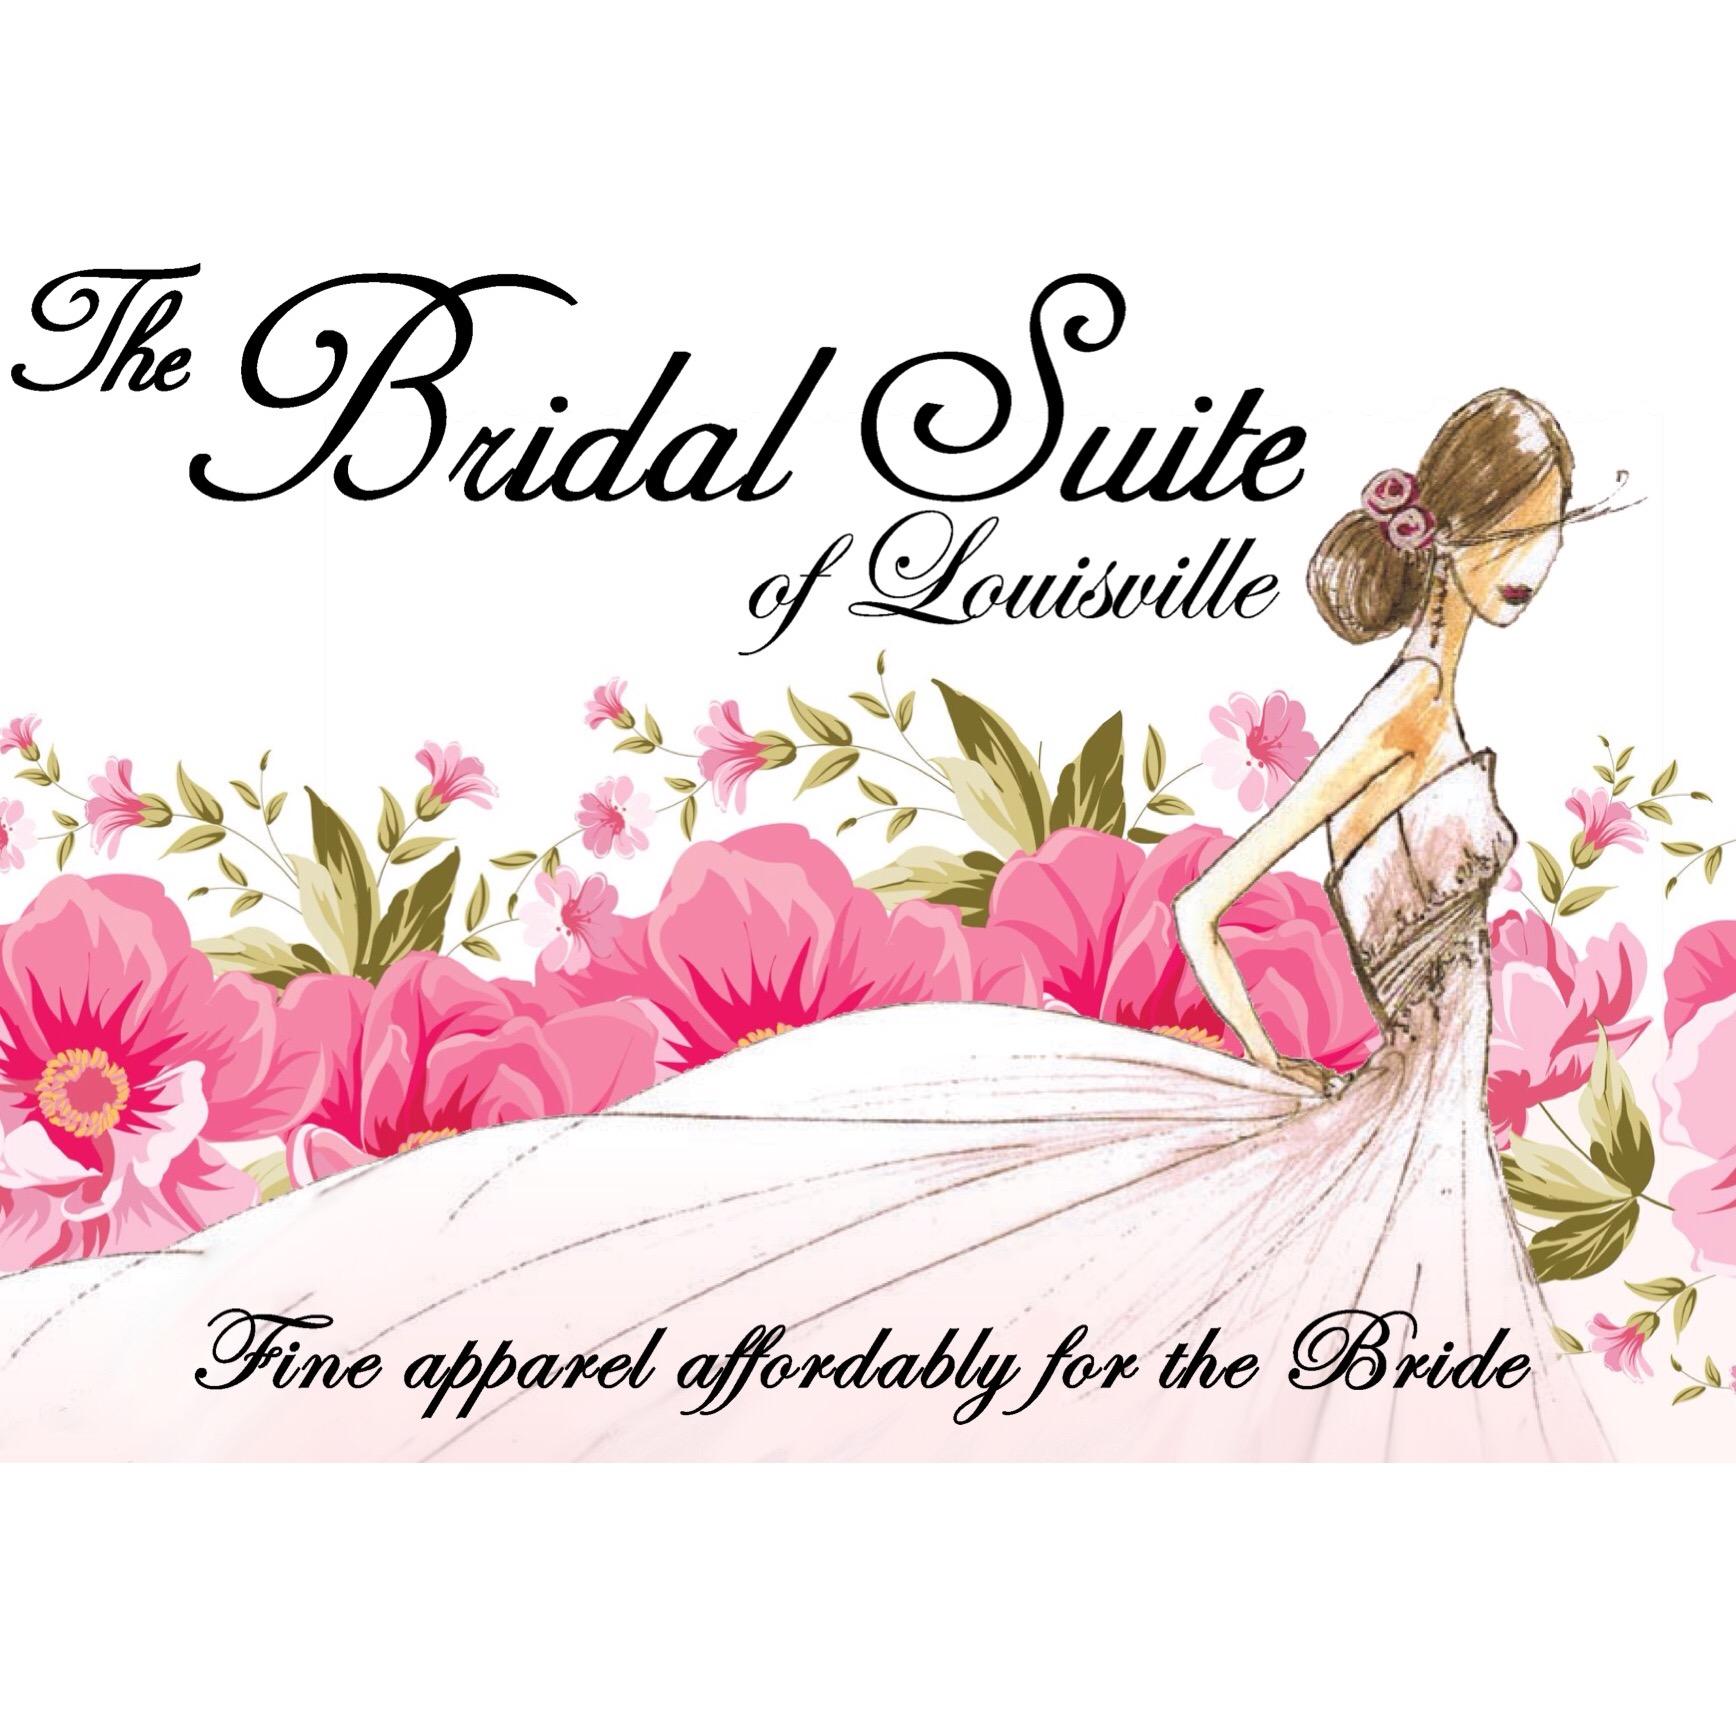 The Bridal Suite of Louisville